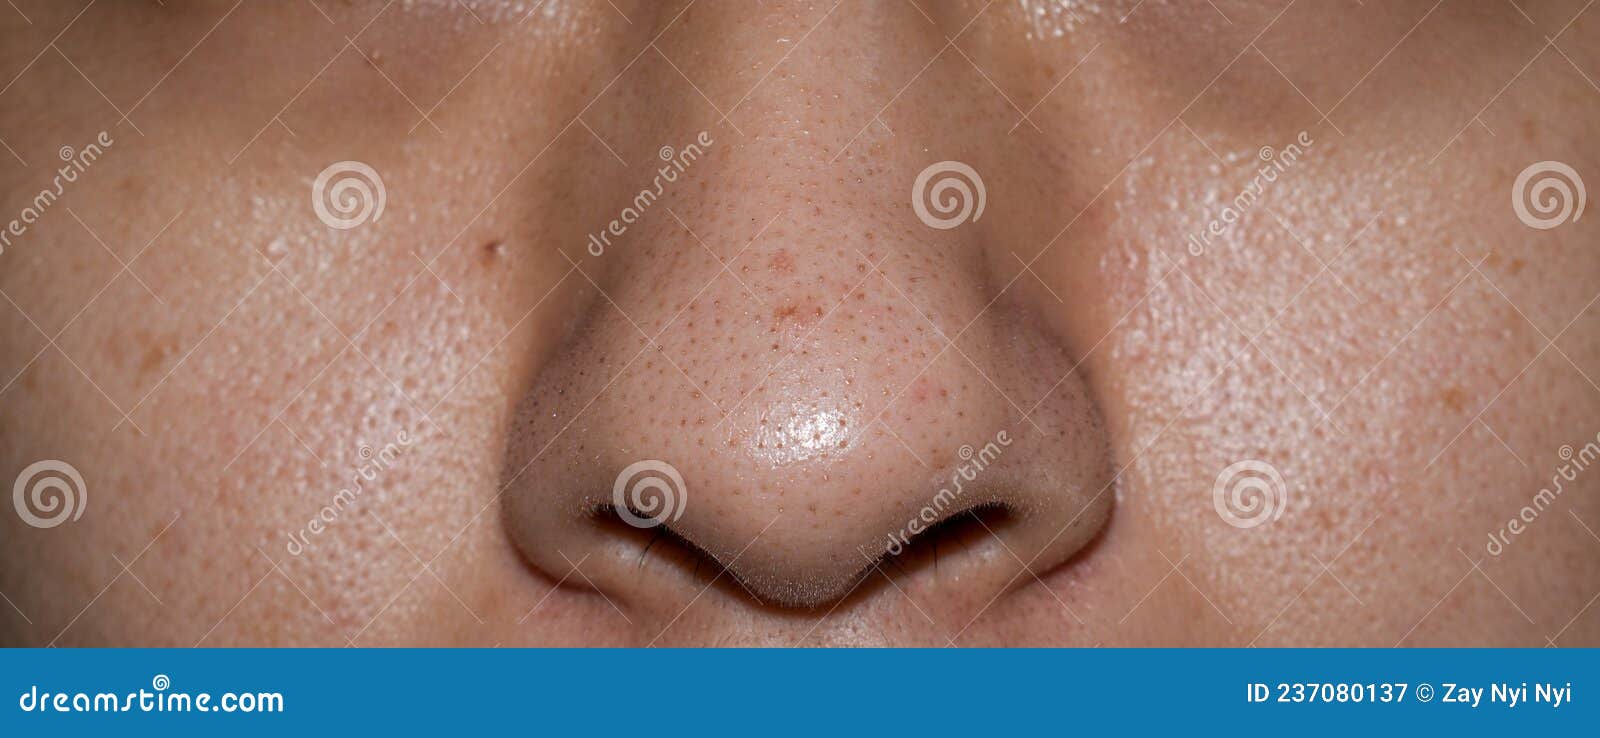 Blackheads or Black Heads on Nose of Asian Man Stock Image - Image of  asian, dark: 237080137